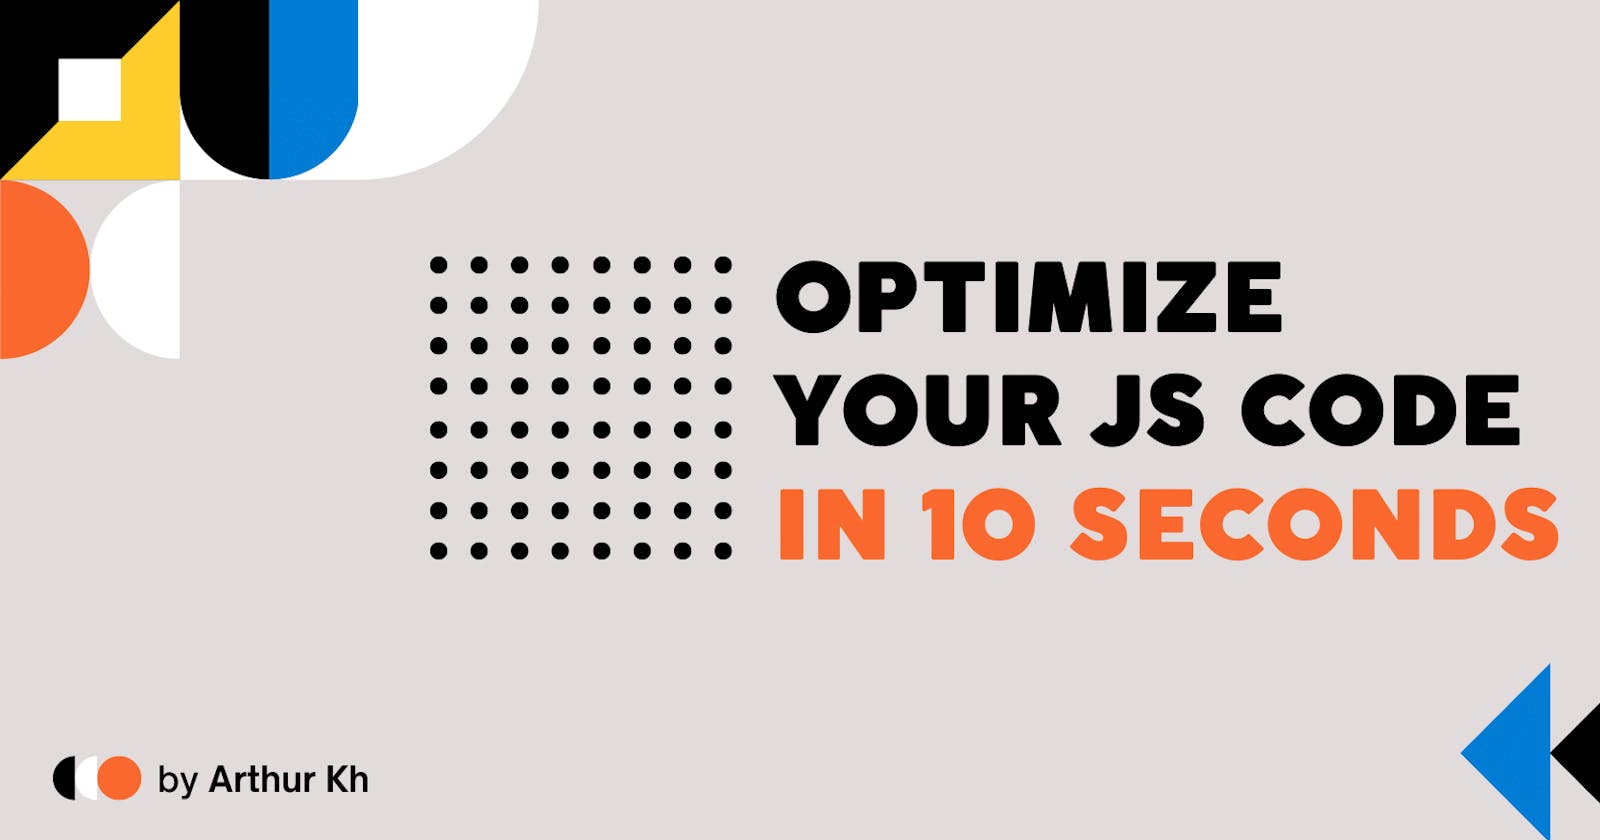 Optimize your JS code in 10 seconds